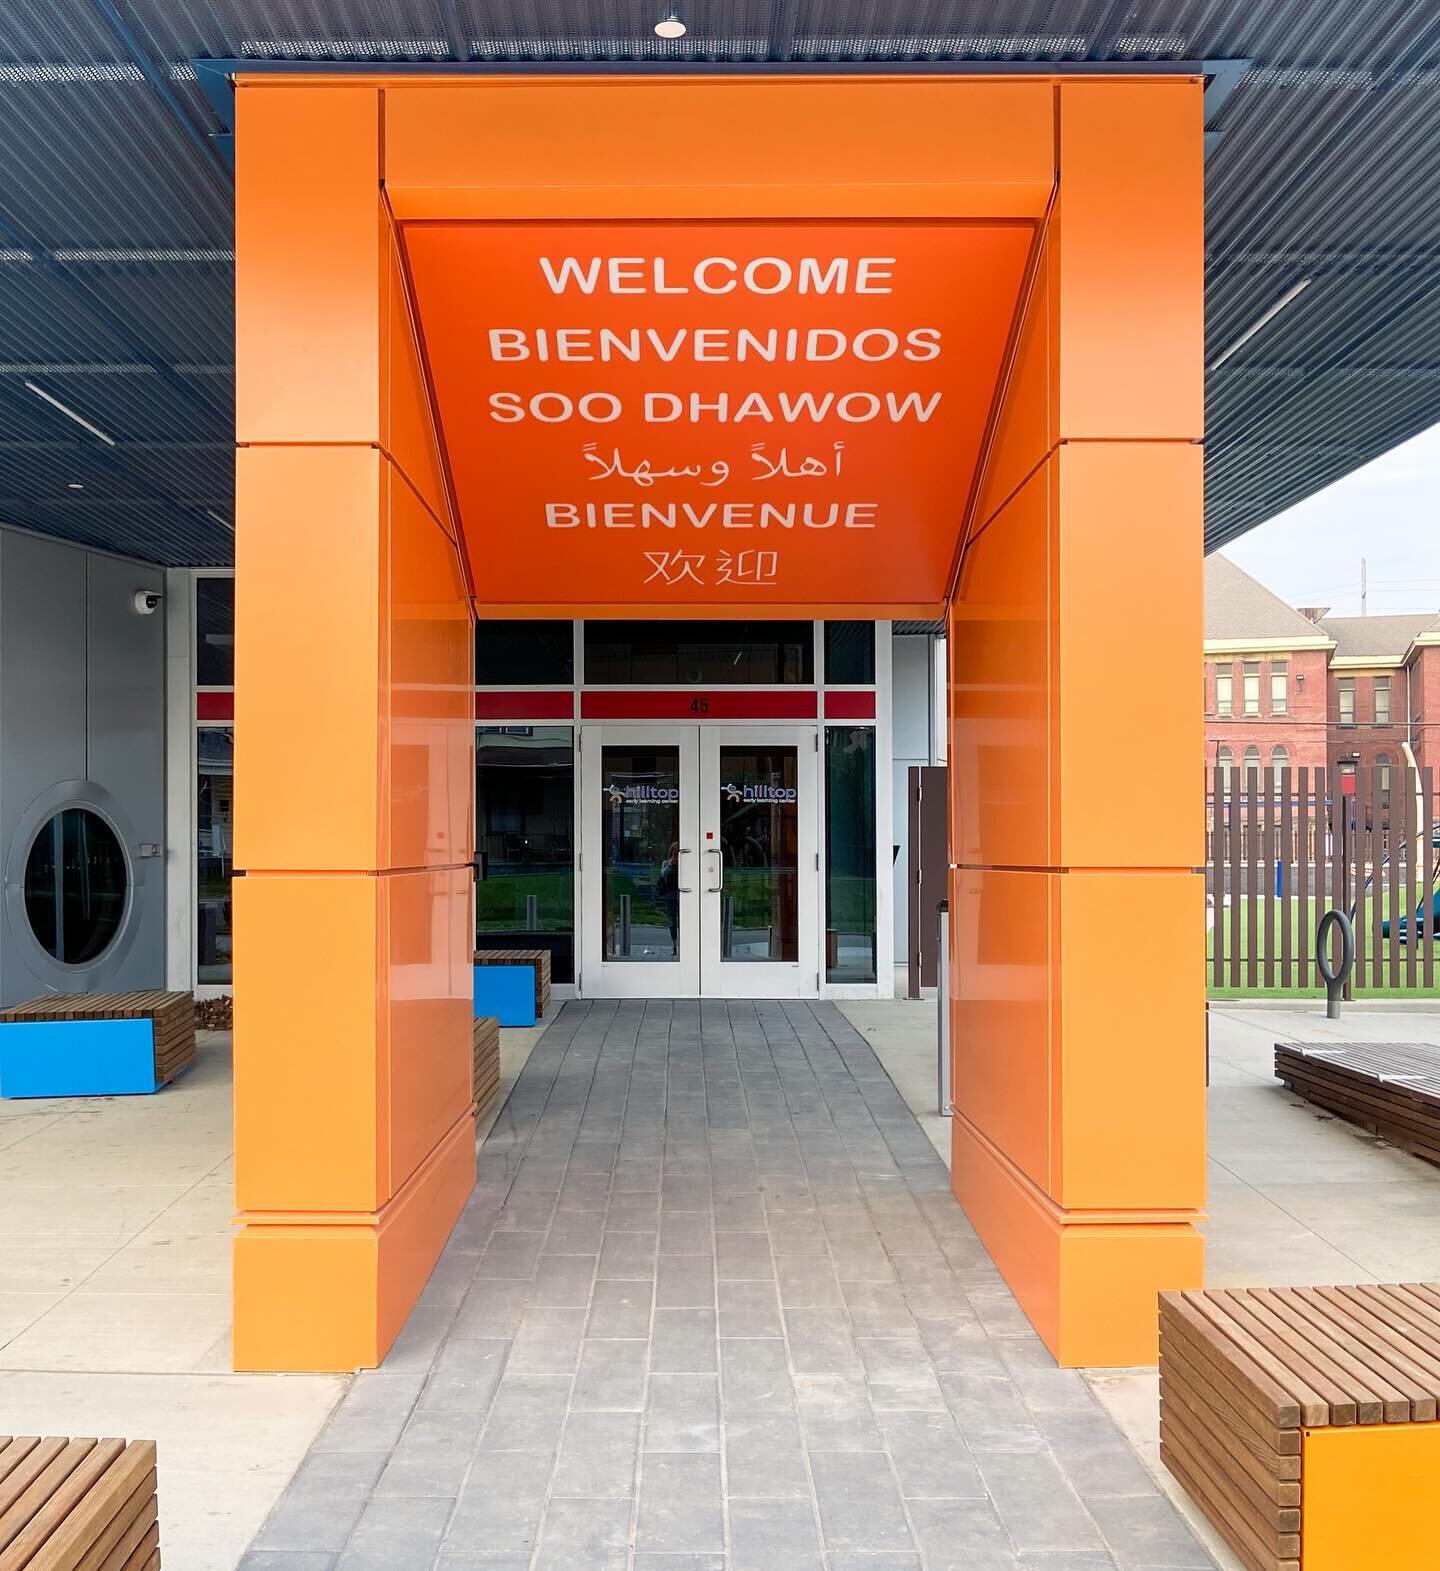 Hilltop Early Learning Center&rsquo;s entrance, which greets you with &lsquo;welcome&rsquo; in a multitude of languages. 🌍✨
&bull;
&bull;
&bull;
&bull;
#bbcodesign #architecture #interiors #interiordesign #design #bbco #columbus #minorityfirm #woman